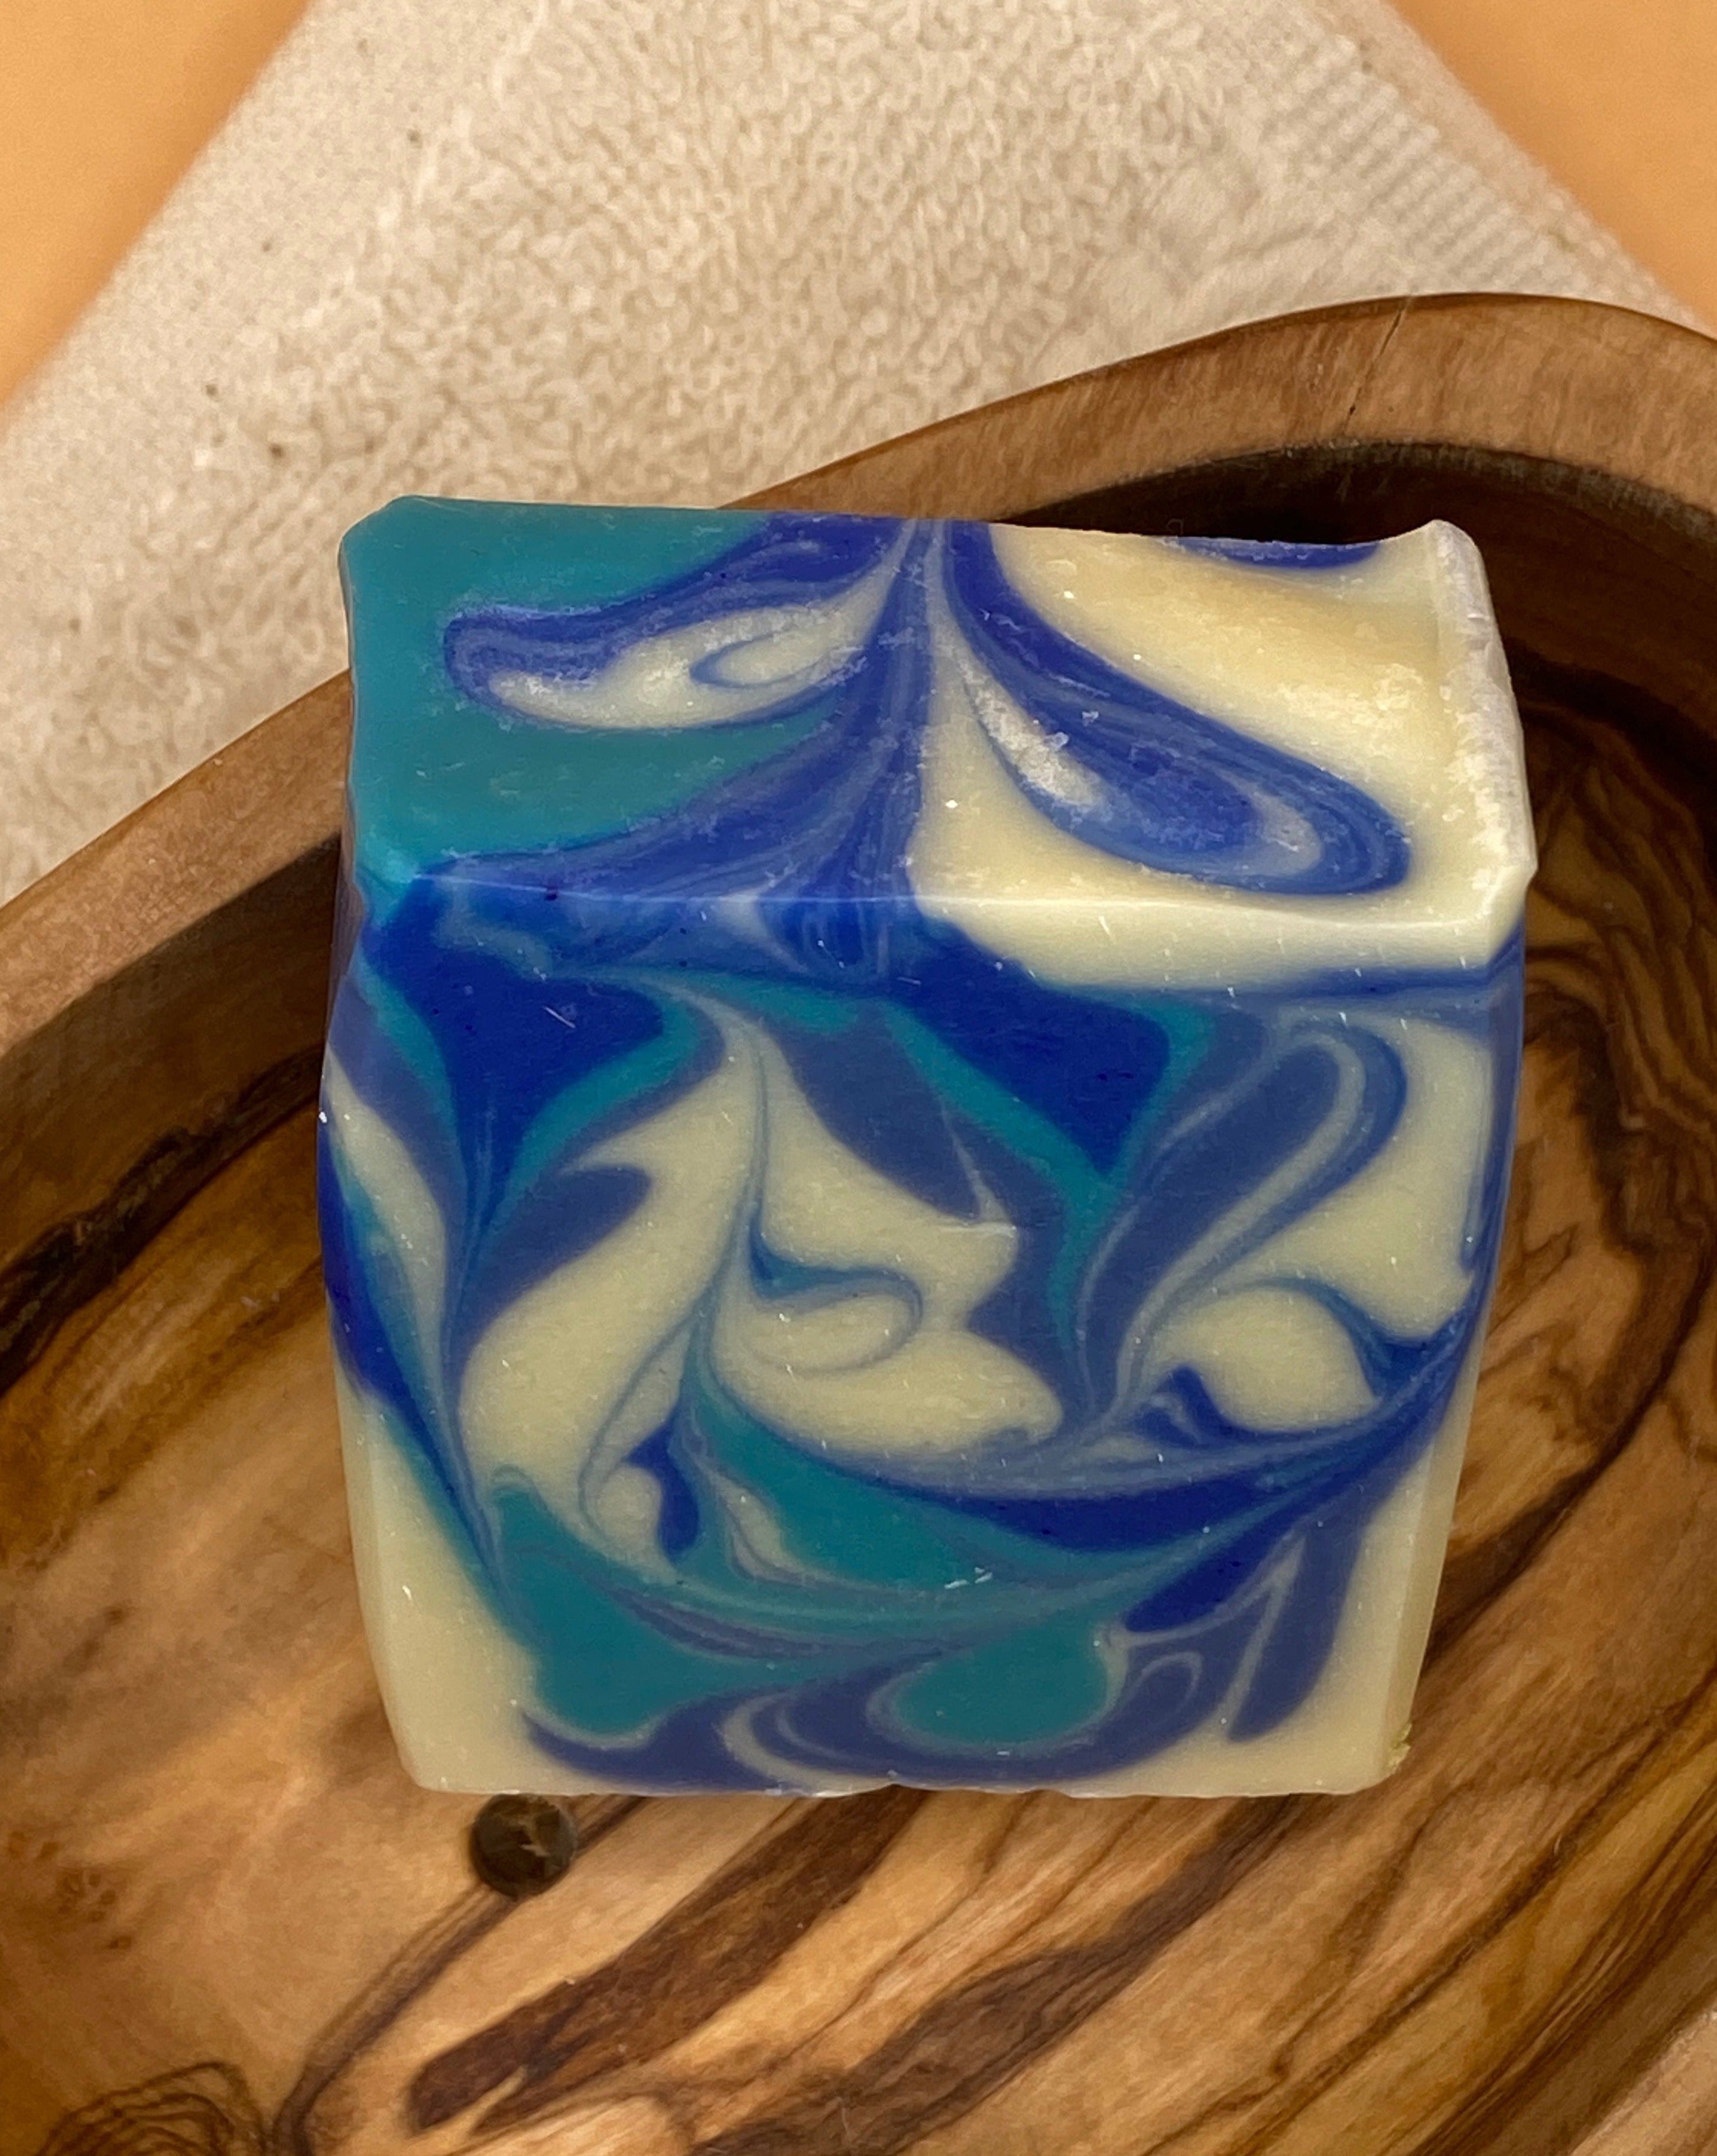 Gone to the beach soap in a soap bowl made out of olive wood.  Its good for hand and body soap  and it contains  all natural plant oils. It is very good for your skin. It has 3 different blue and a white color in a nice design. It has a nice fresh fragrance reminding one of a scent from the sea. 